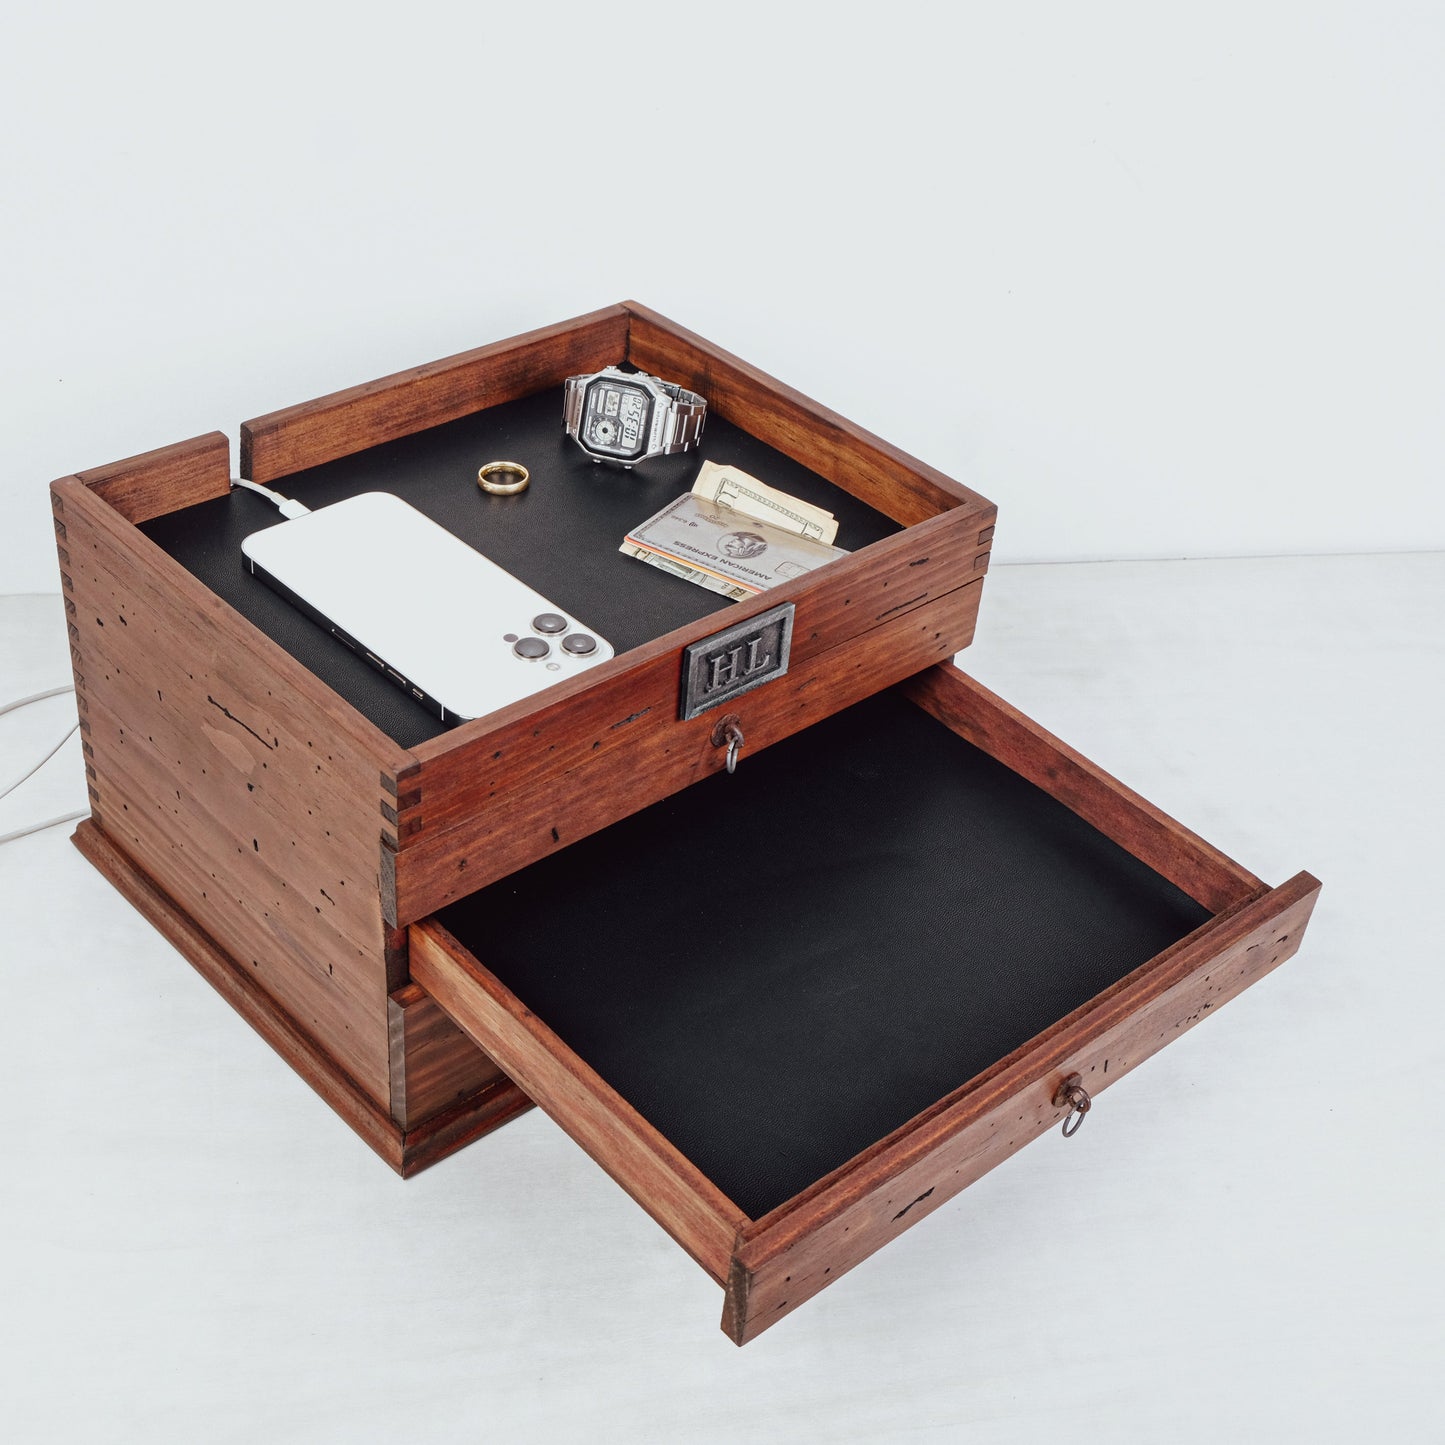 Charging Station Box for 8 Watches - Deferichs